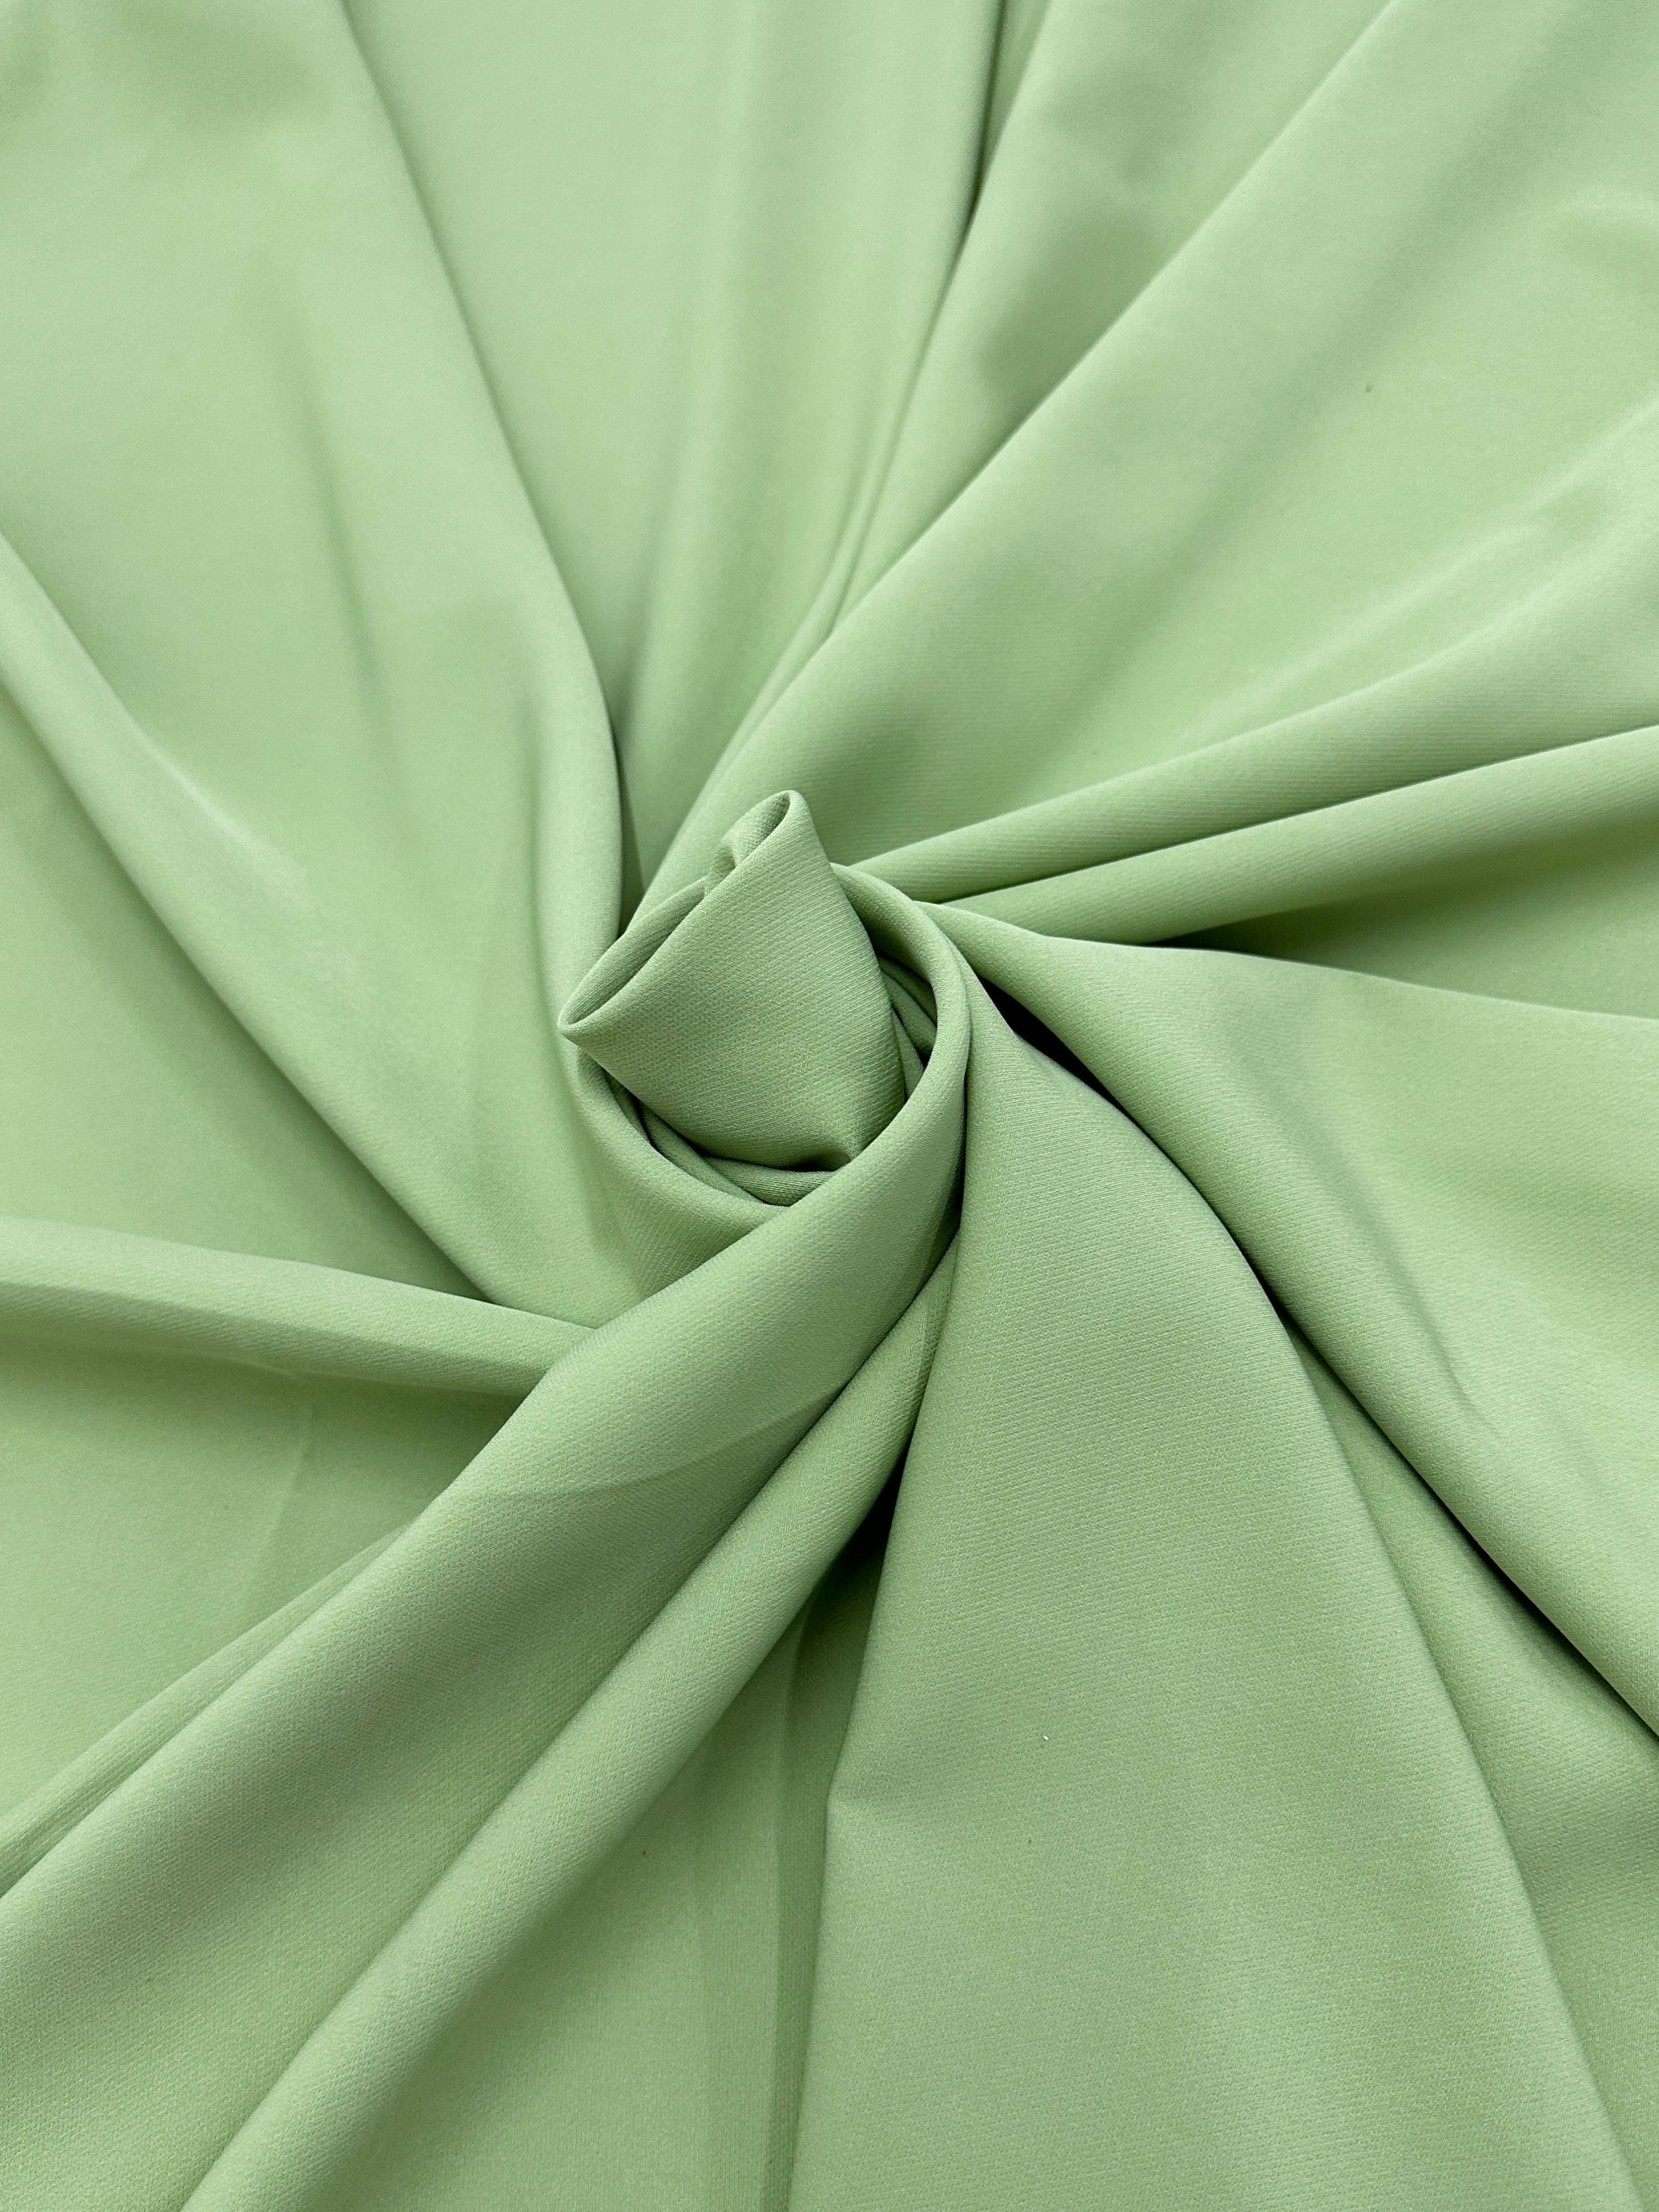 pistachio stretch crepe, pistachio color fabric, green fabric, green dress for woman, pistachio bridal dress, bridal luxury dress, fabric for woman, 4 way stretch, buy fabric online, discounted fabric, fabric on sale, crepe fabric, bridal crepe, crepe for dress, wedding crepe, chiffon crepe, crepe clothing material